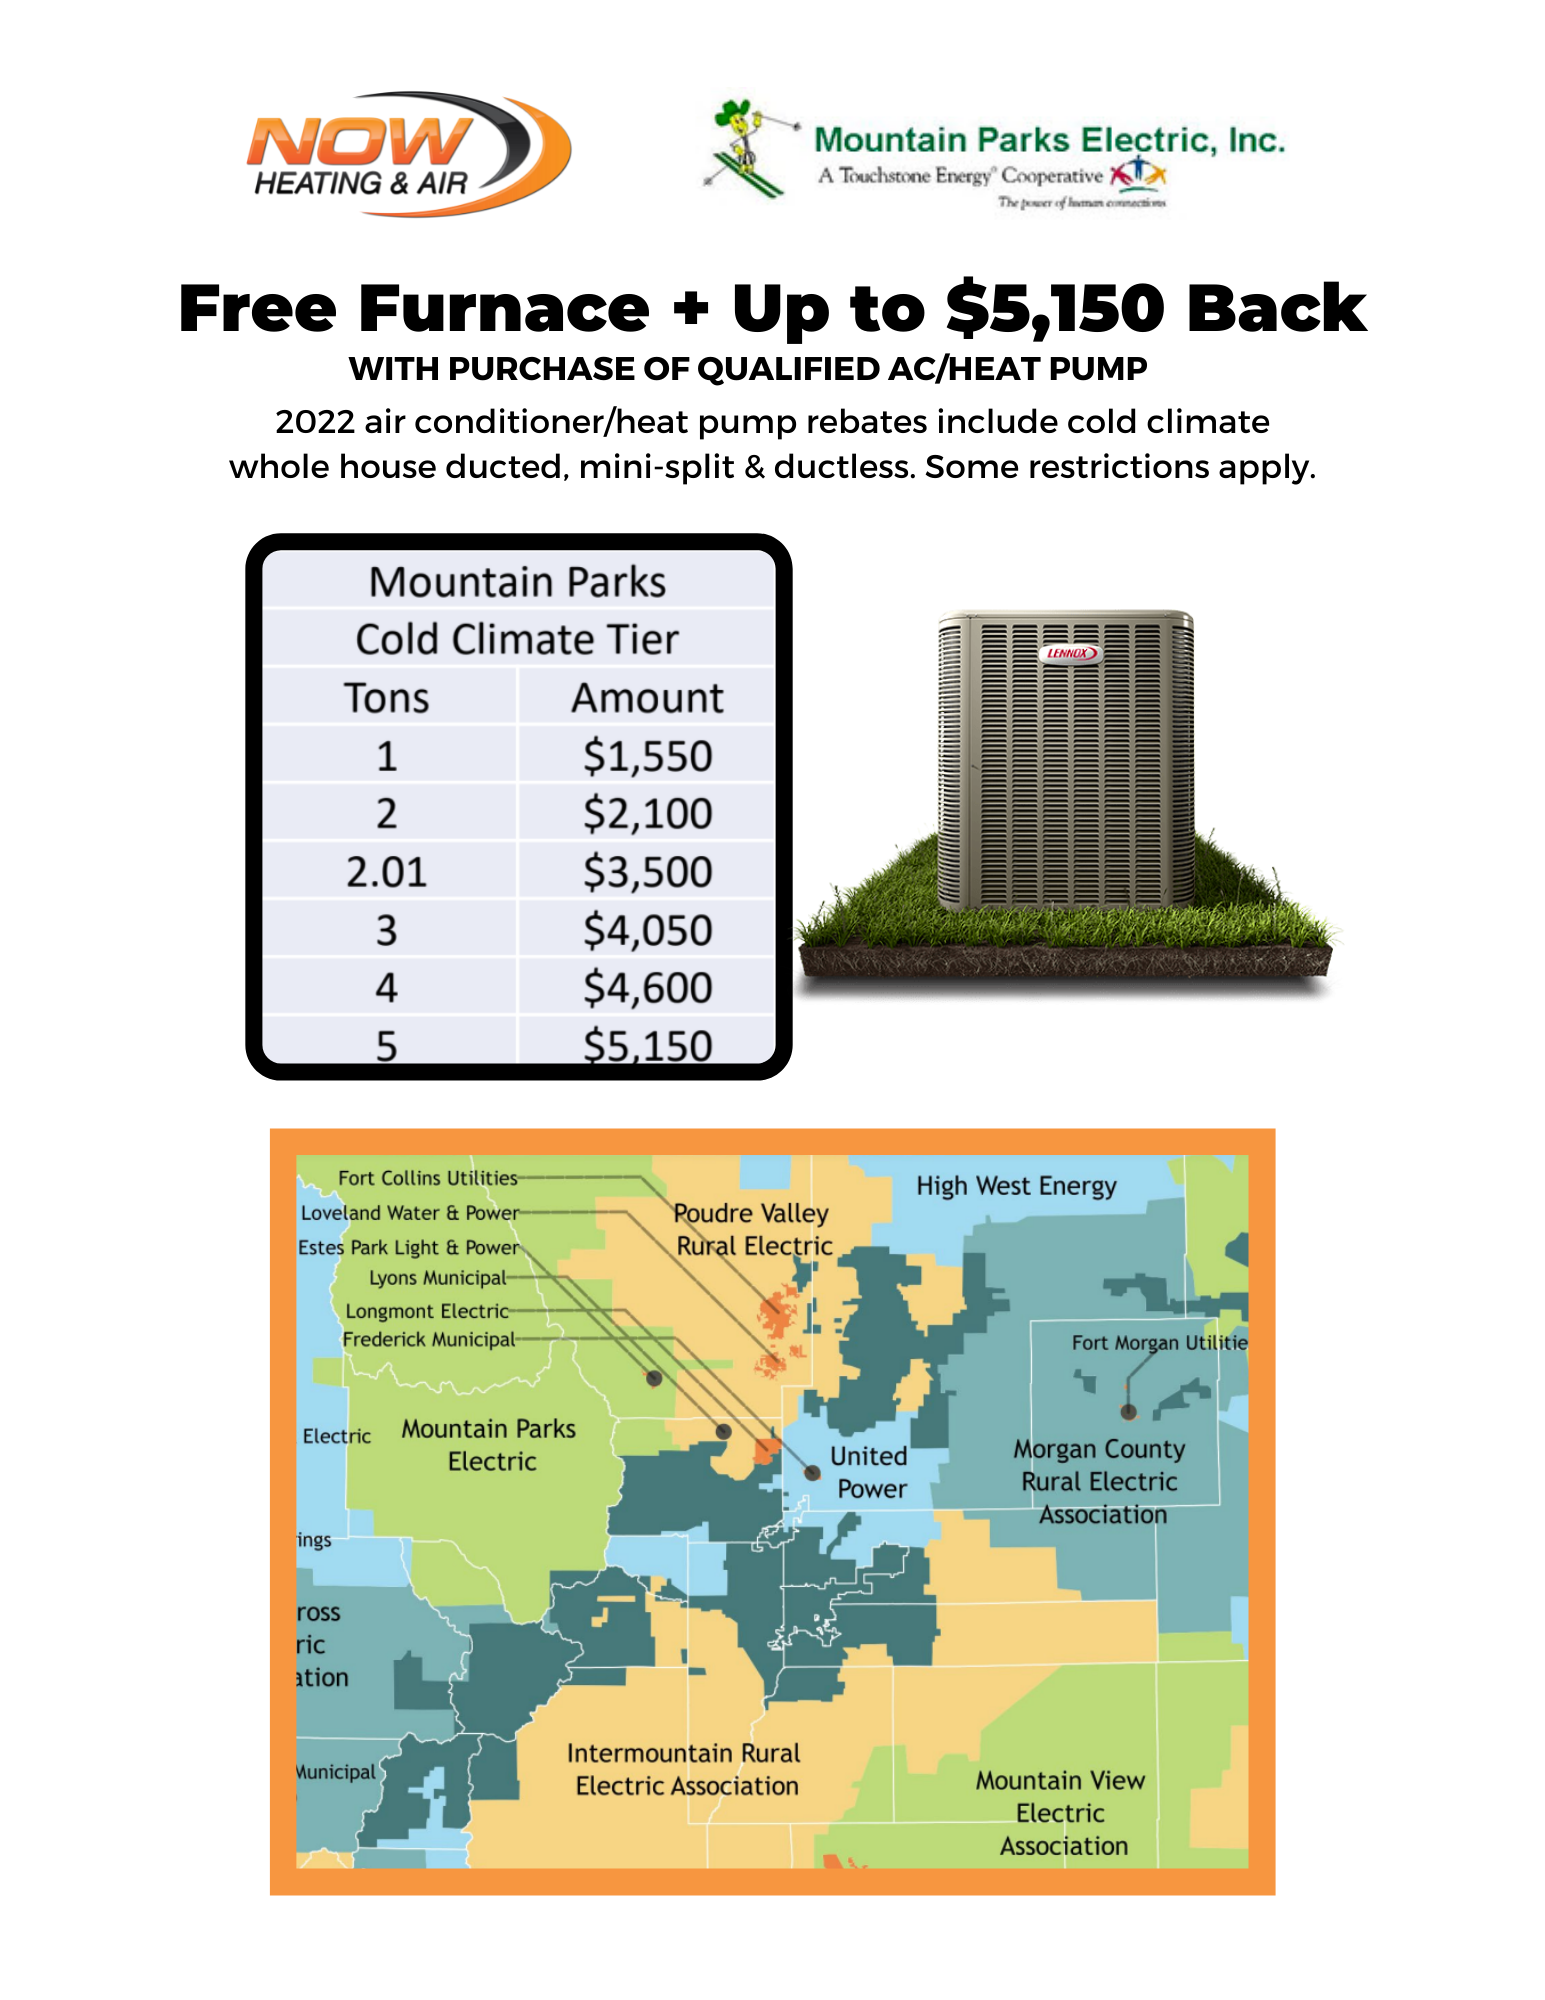 Free Furnace + Up to $5,150 back